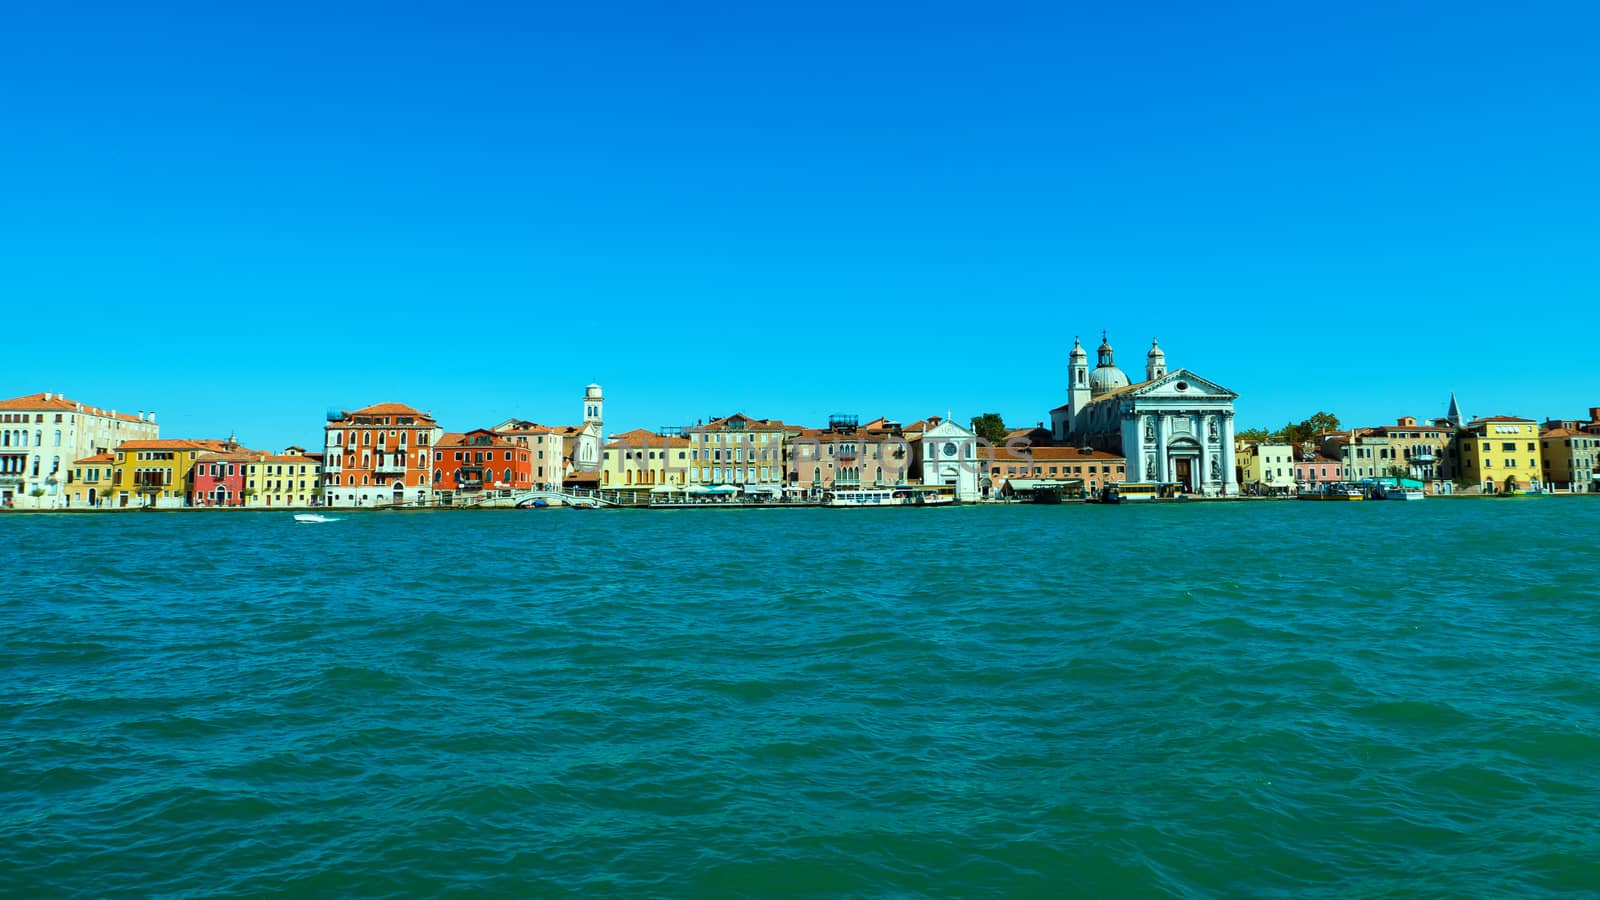 View from Giudecca canal, Venice, Italy. by Isaac74